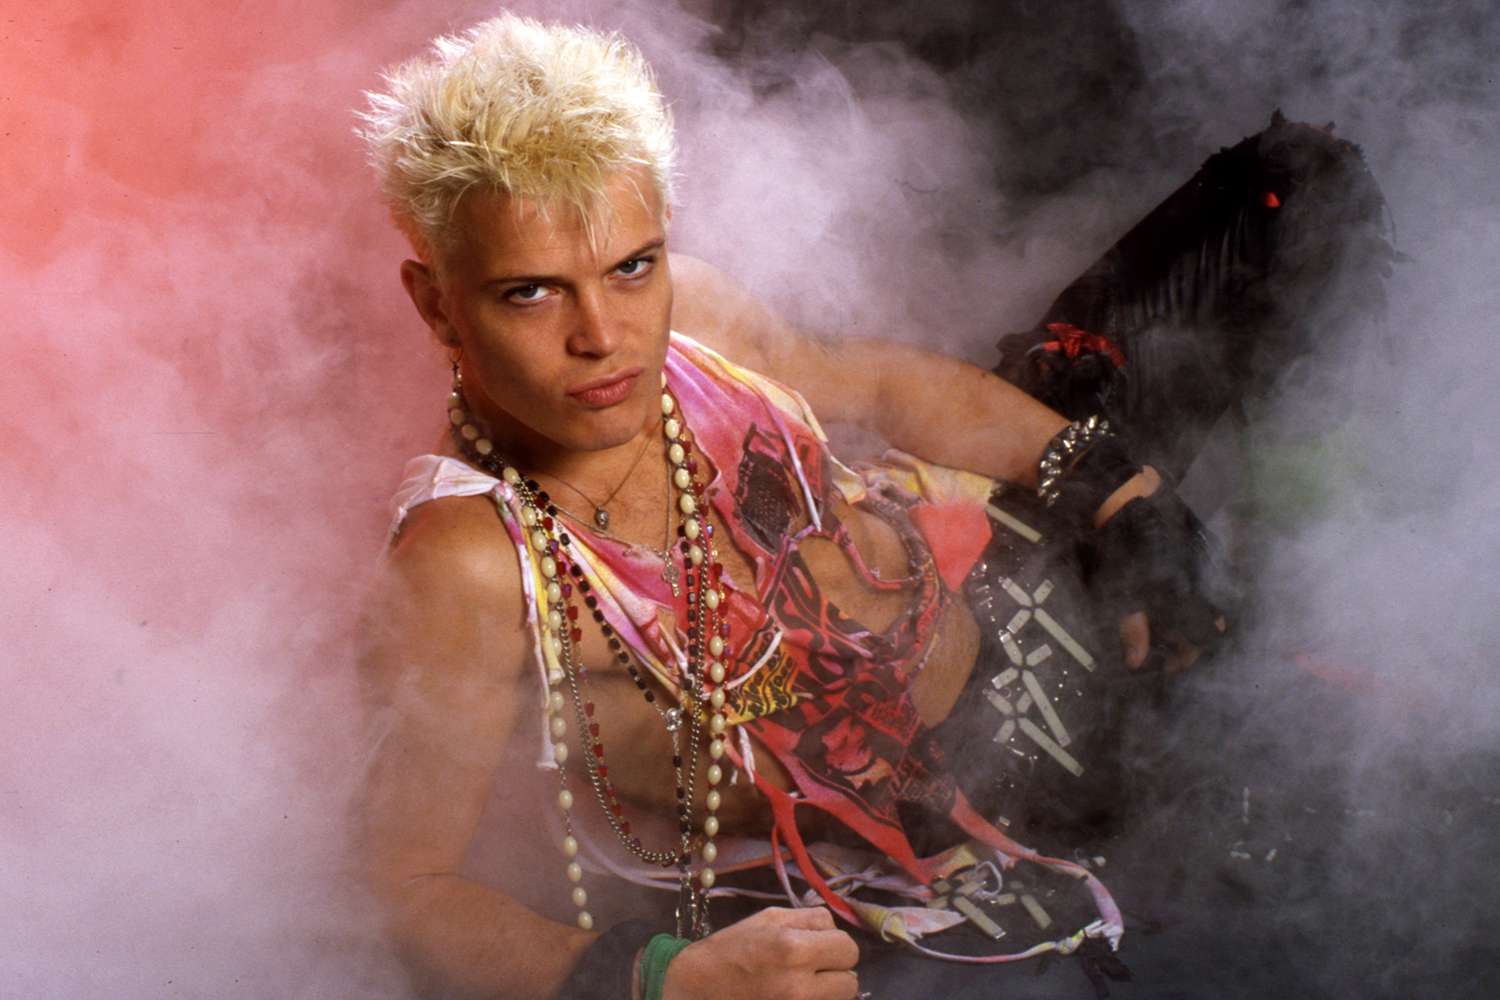 Billy Idol Gave ‘Rebel Yell’ Masters to His ‘Heroin Dealer’ to ‘Blackmail’ Label [Video]